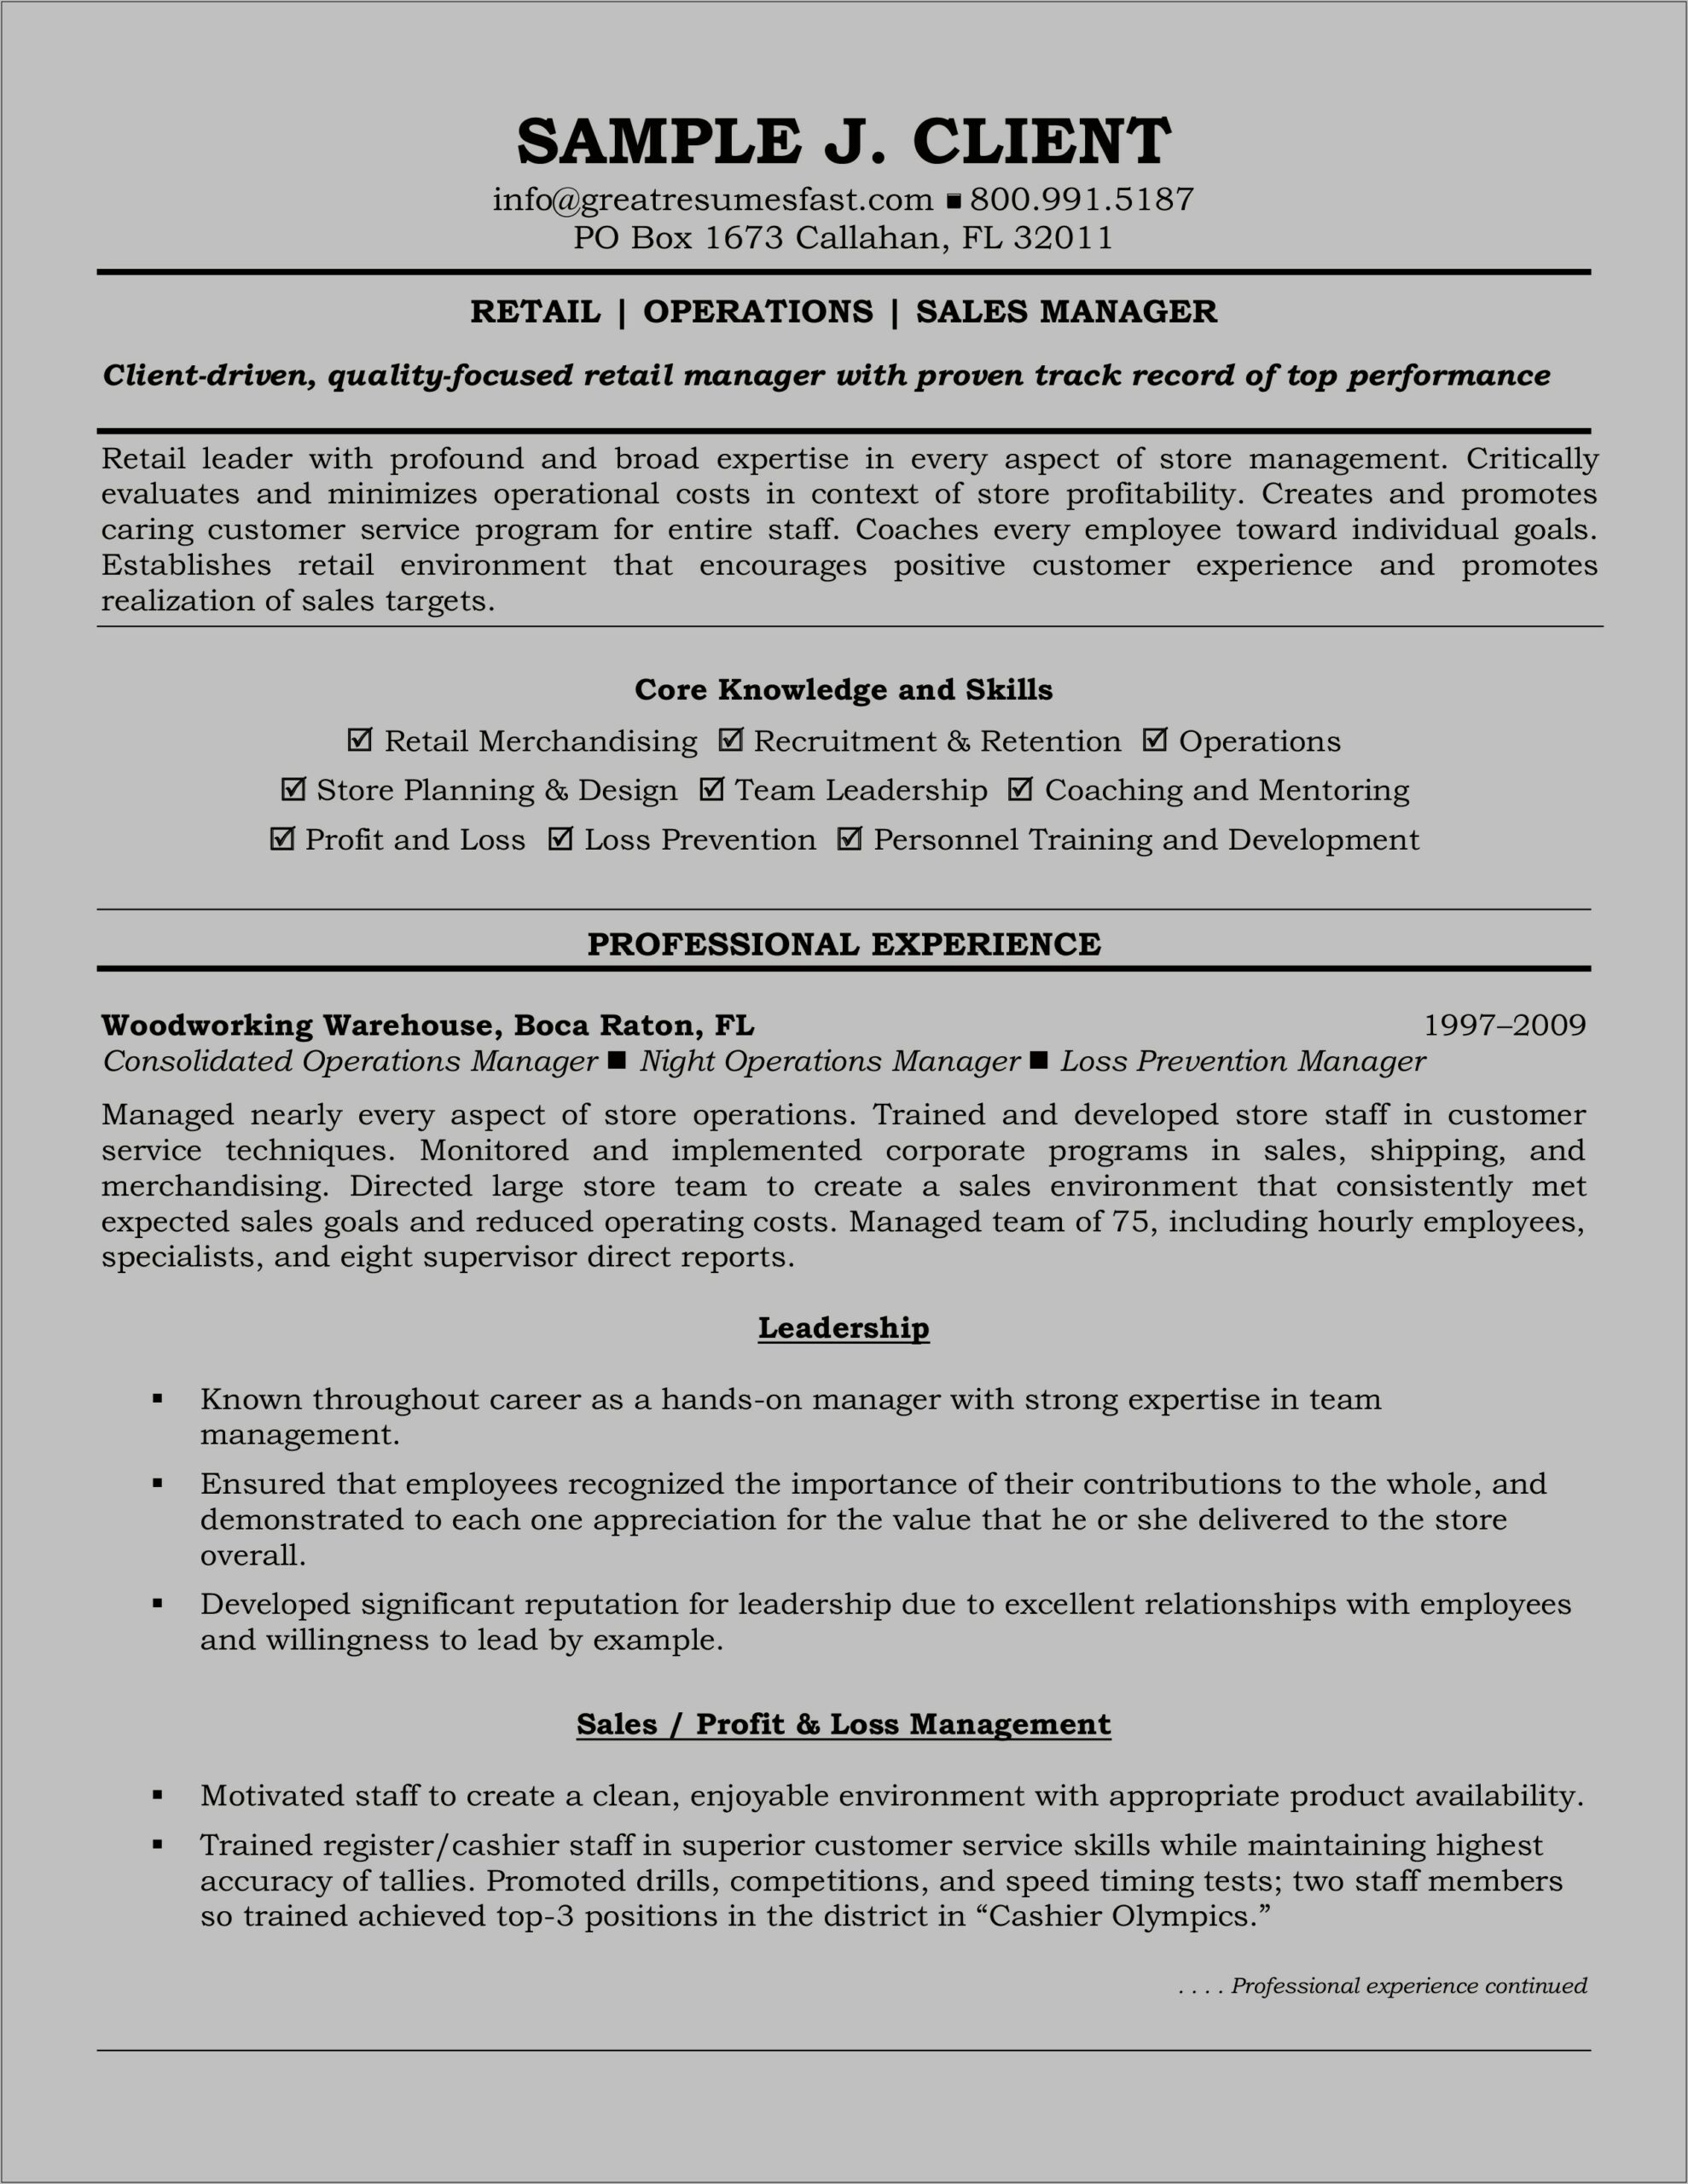 Retail Operation Manager Resume Objective